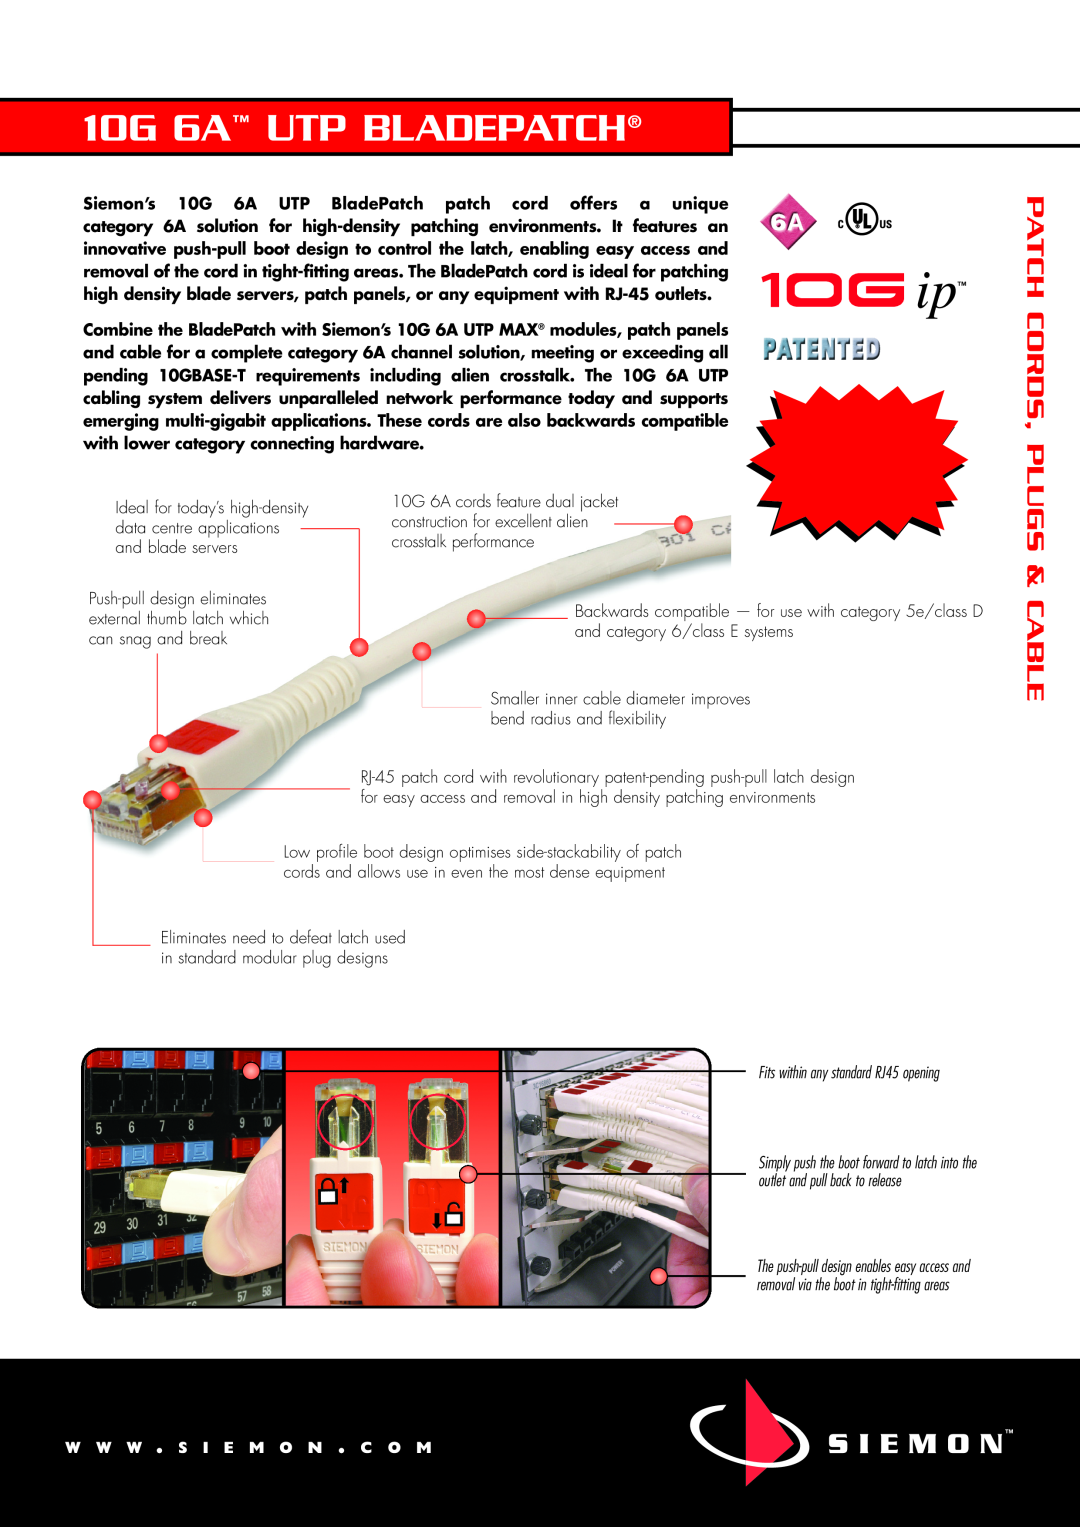 The Siemon Company manual Fits within any standard RJ45 opening, 10G 6A UTP BLADEPATCH, Patch Cords, Plugs & Cable 